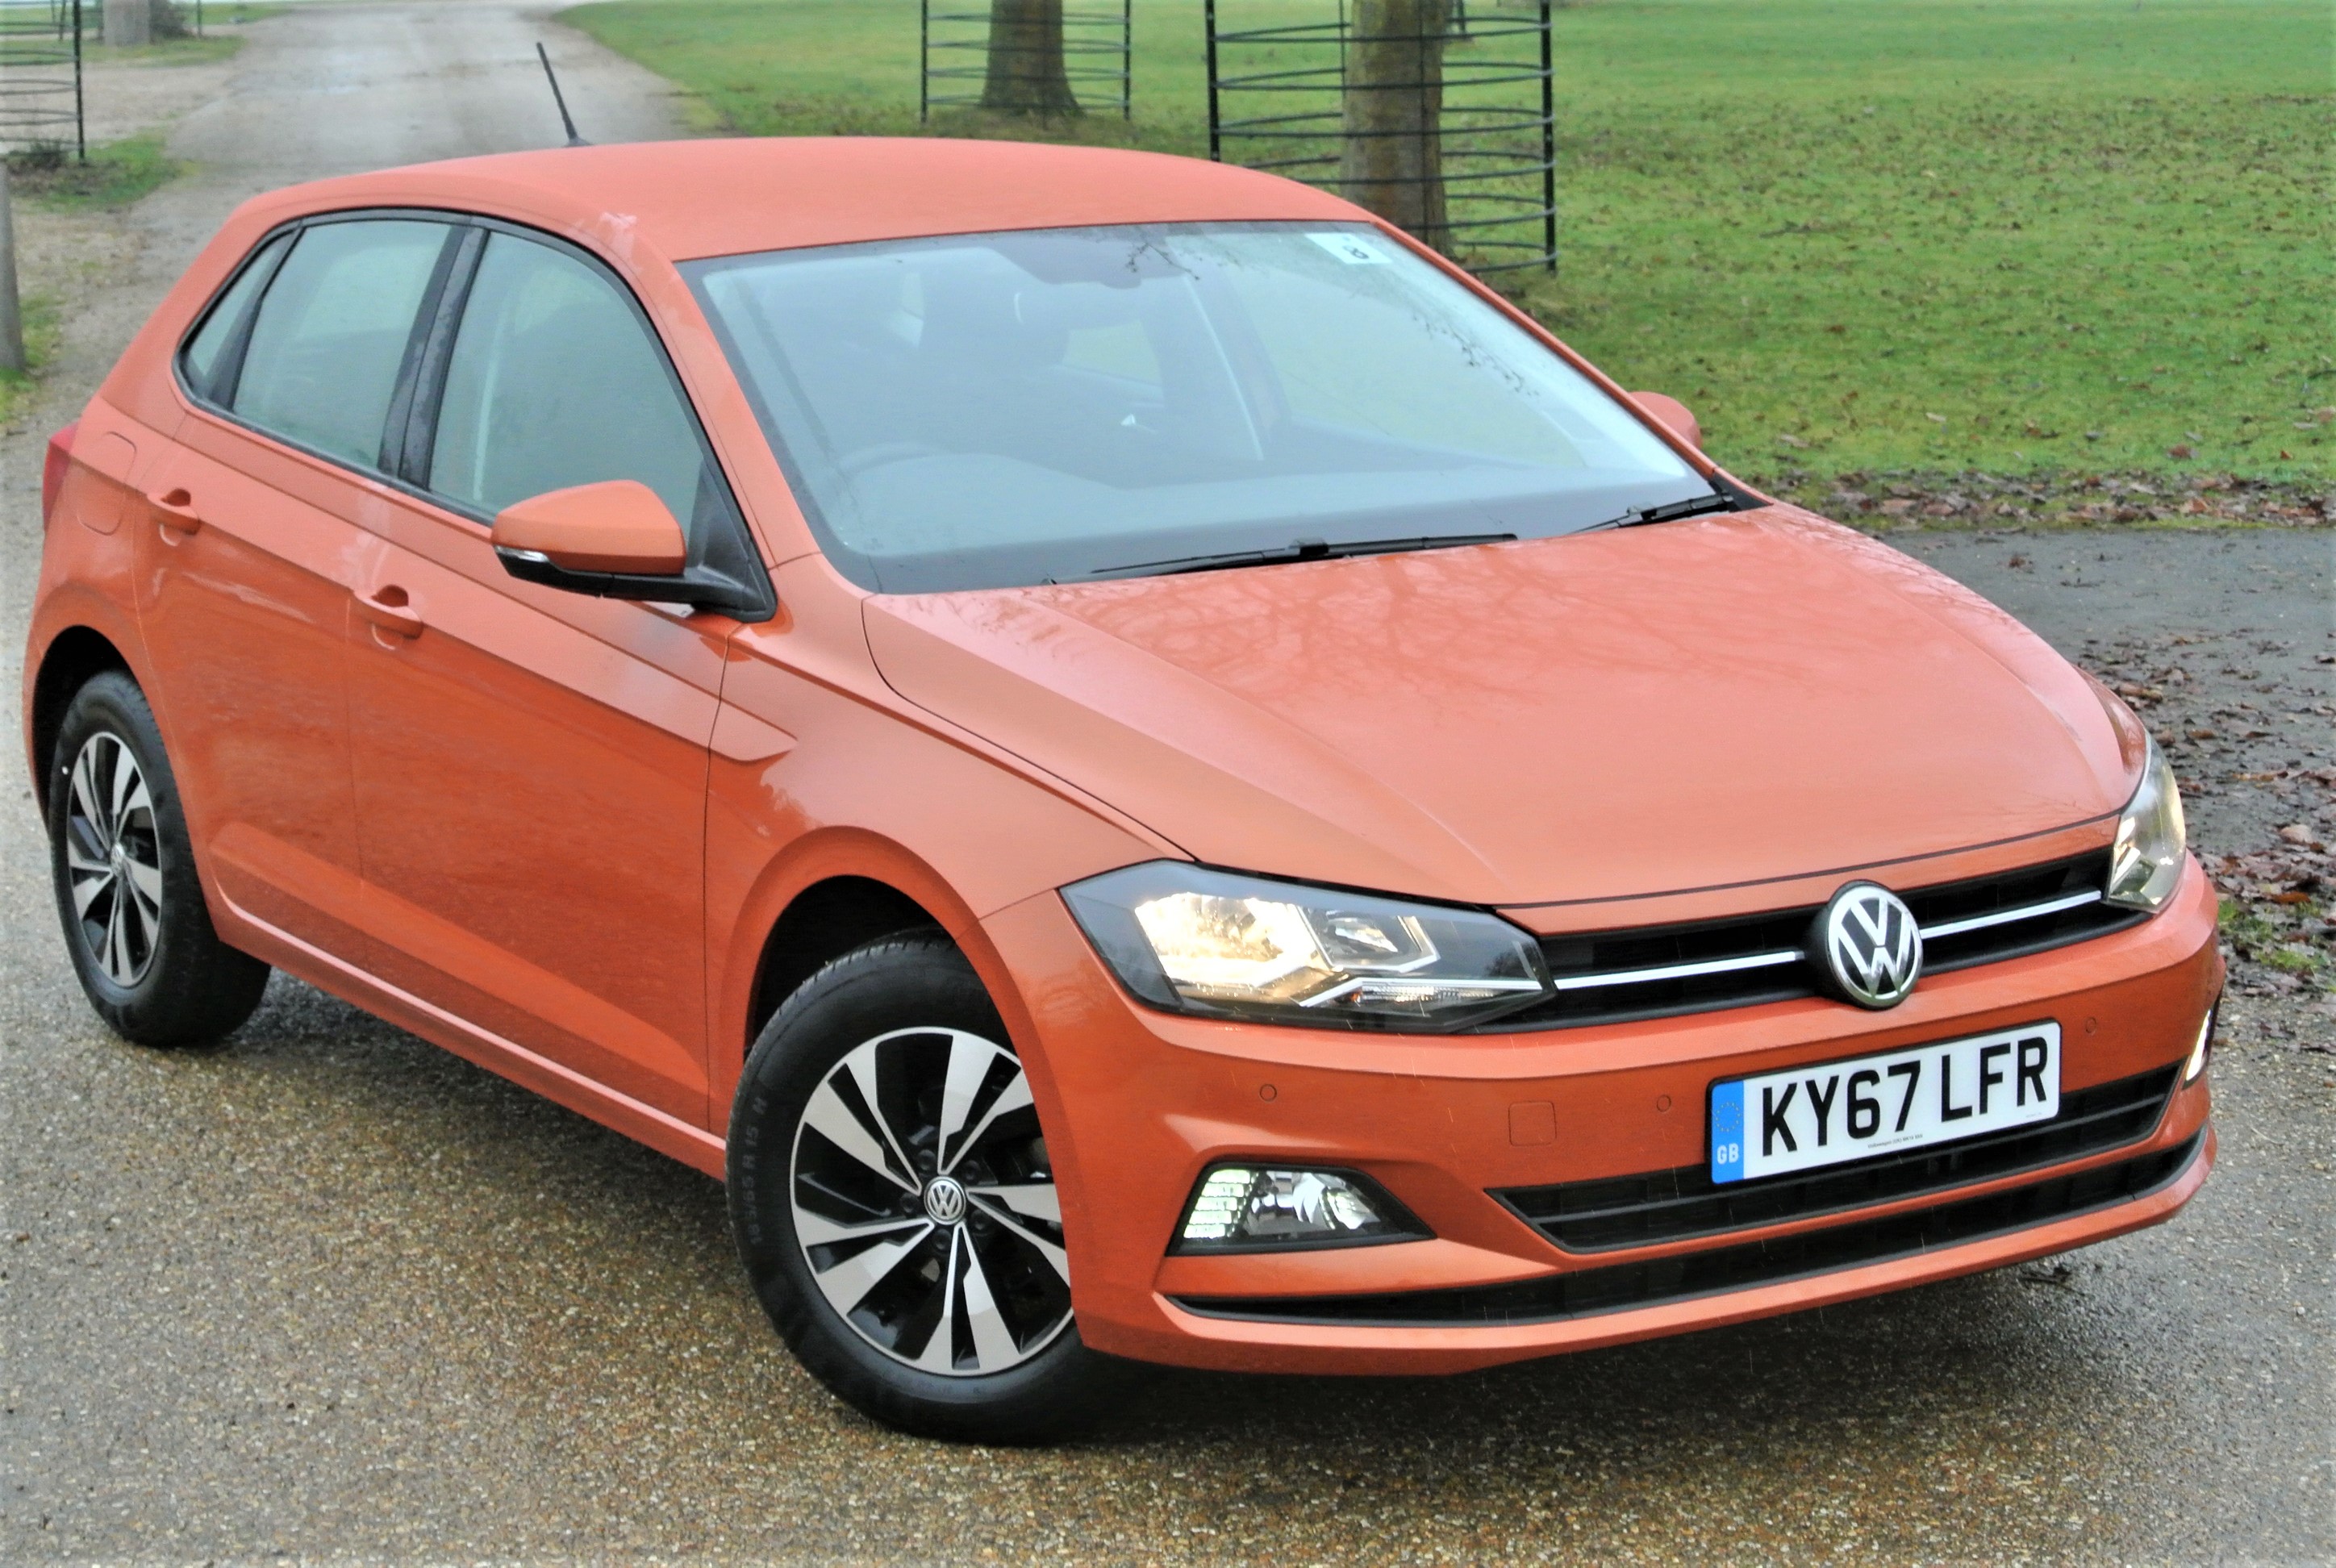 Minting a fresh Polo is a monster step for Volkswagen